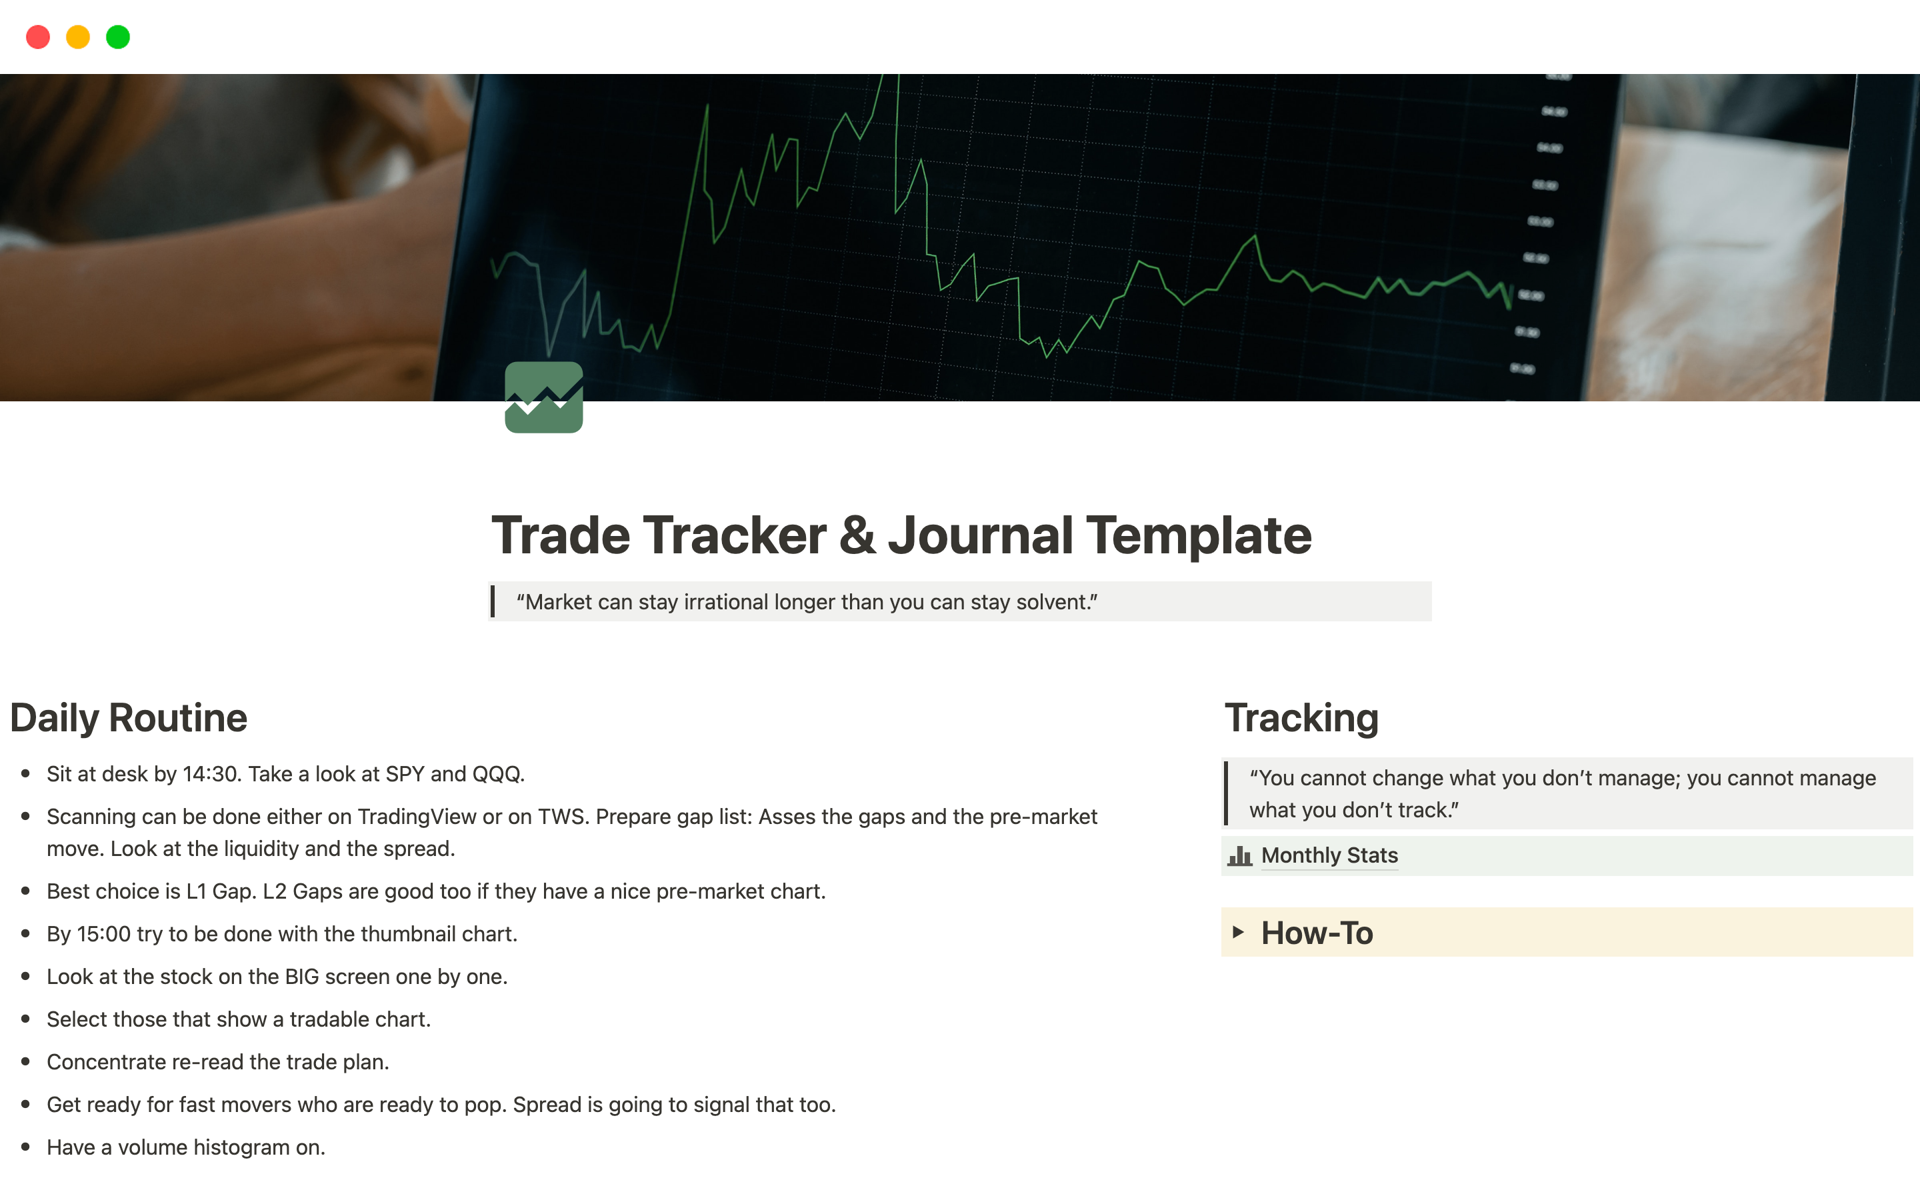 A template preview for Trade Tracker & Journal